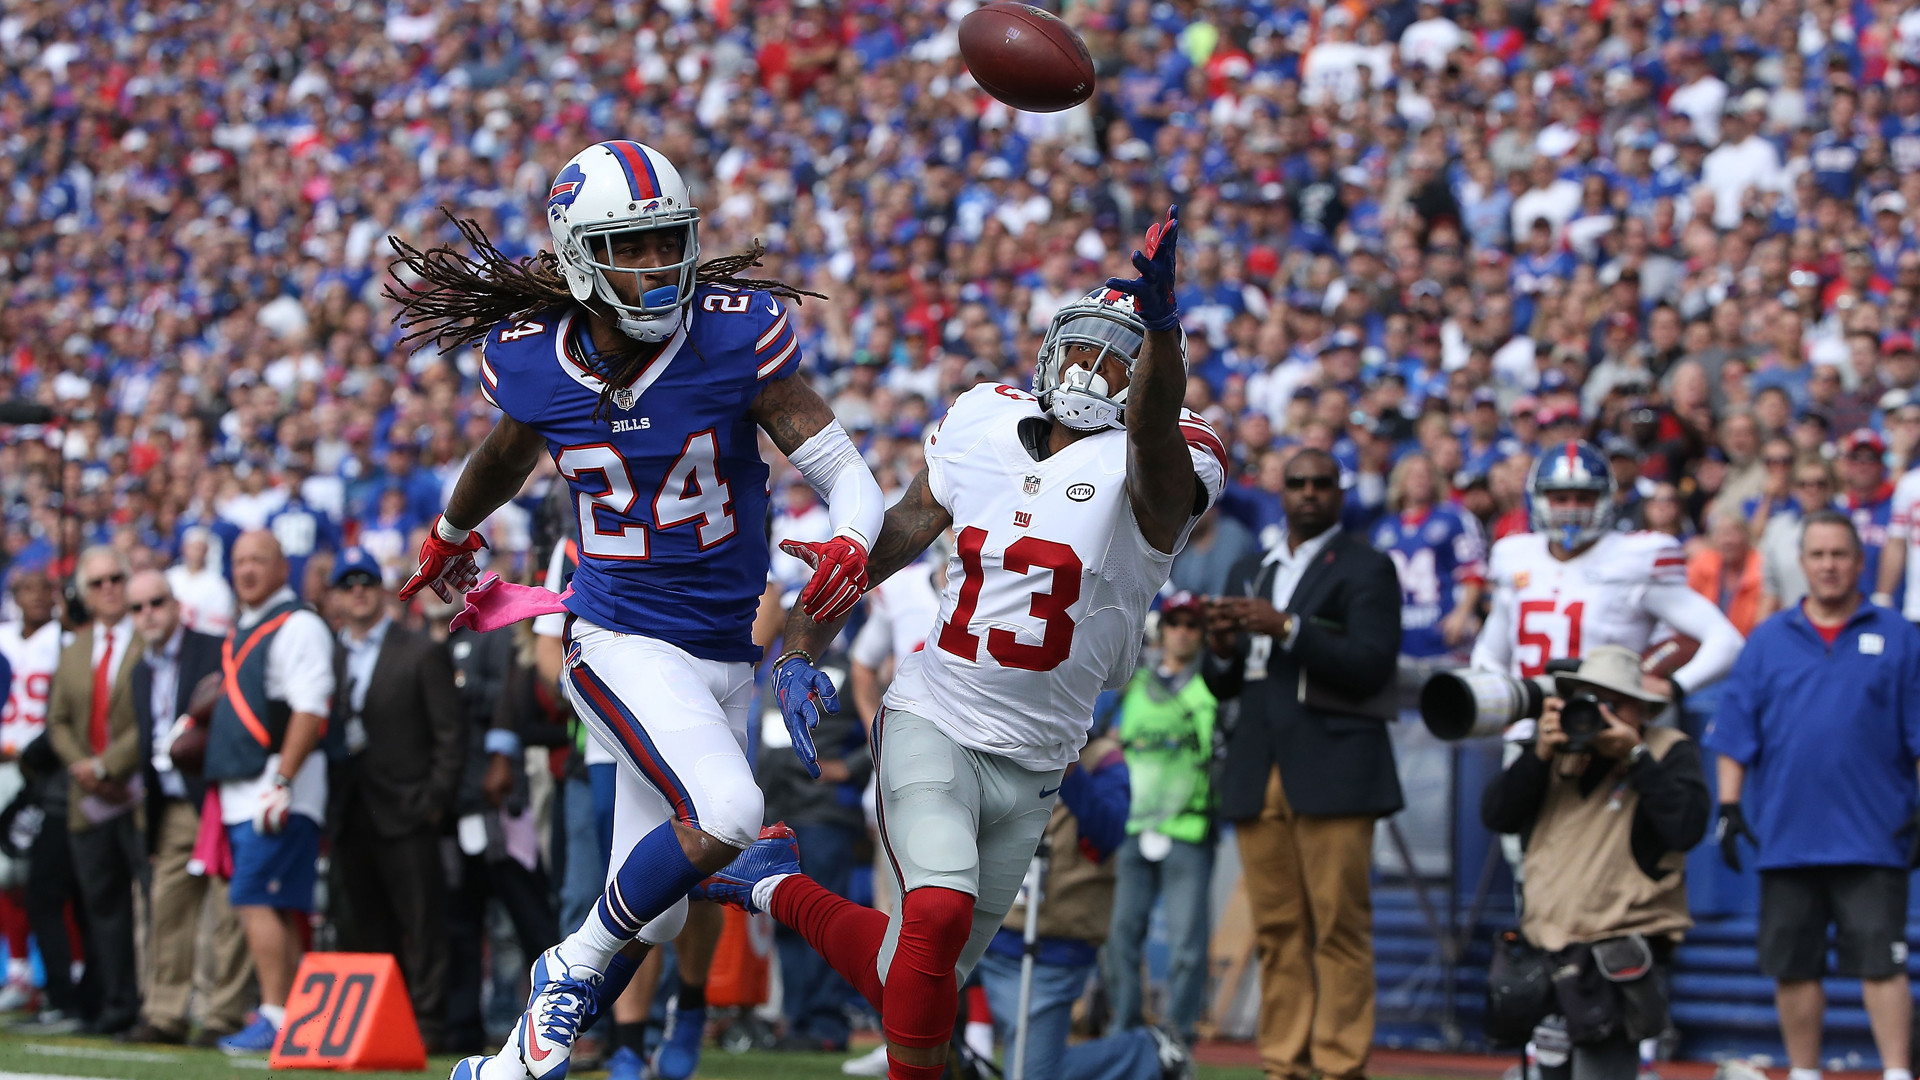 1920x1080 Odell Beckham Jr. nearly repeated 'The Catch' against the Buffalo Bills, but